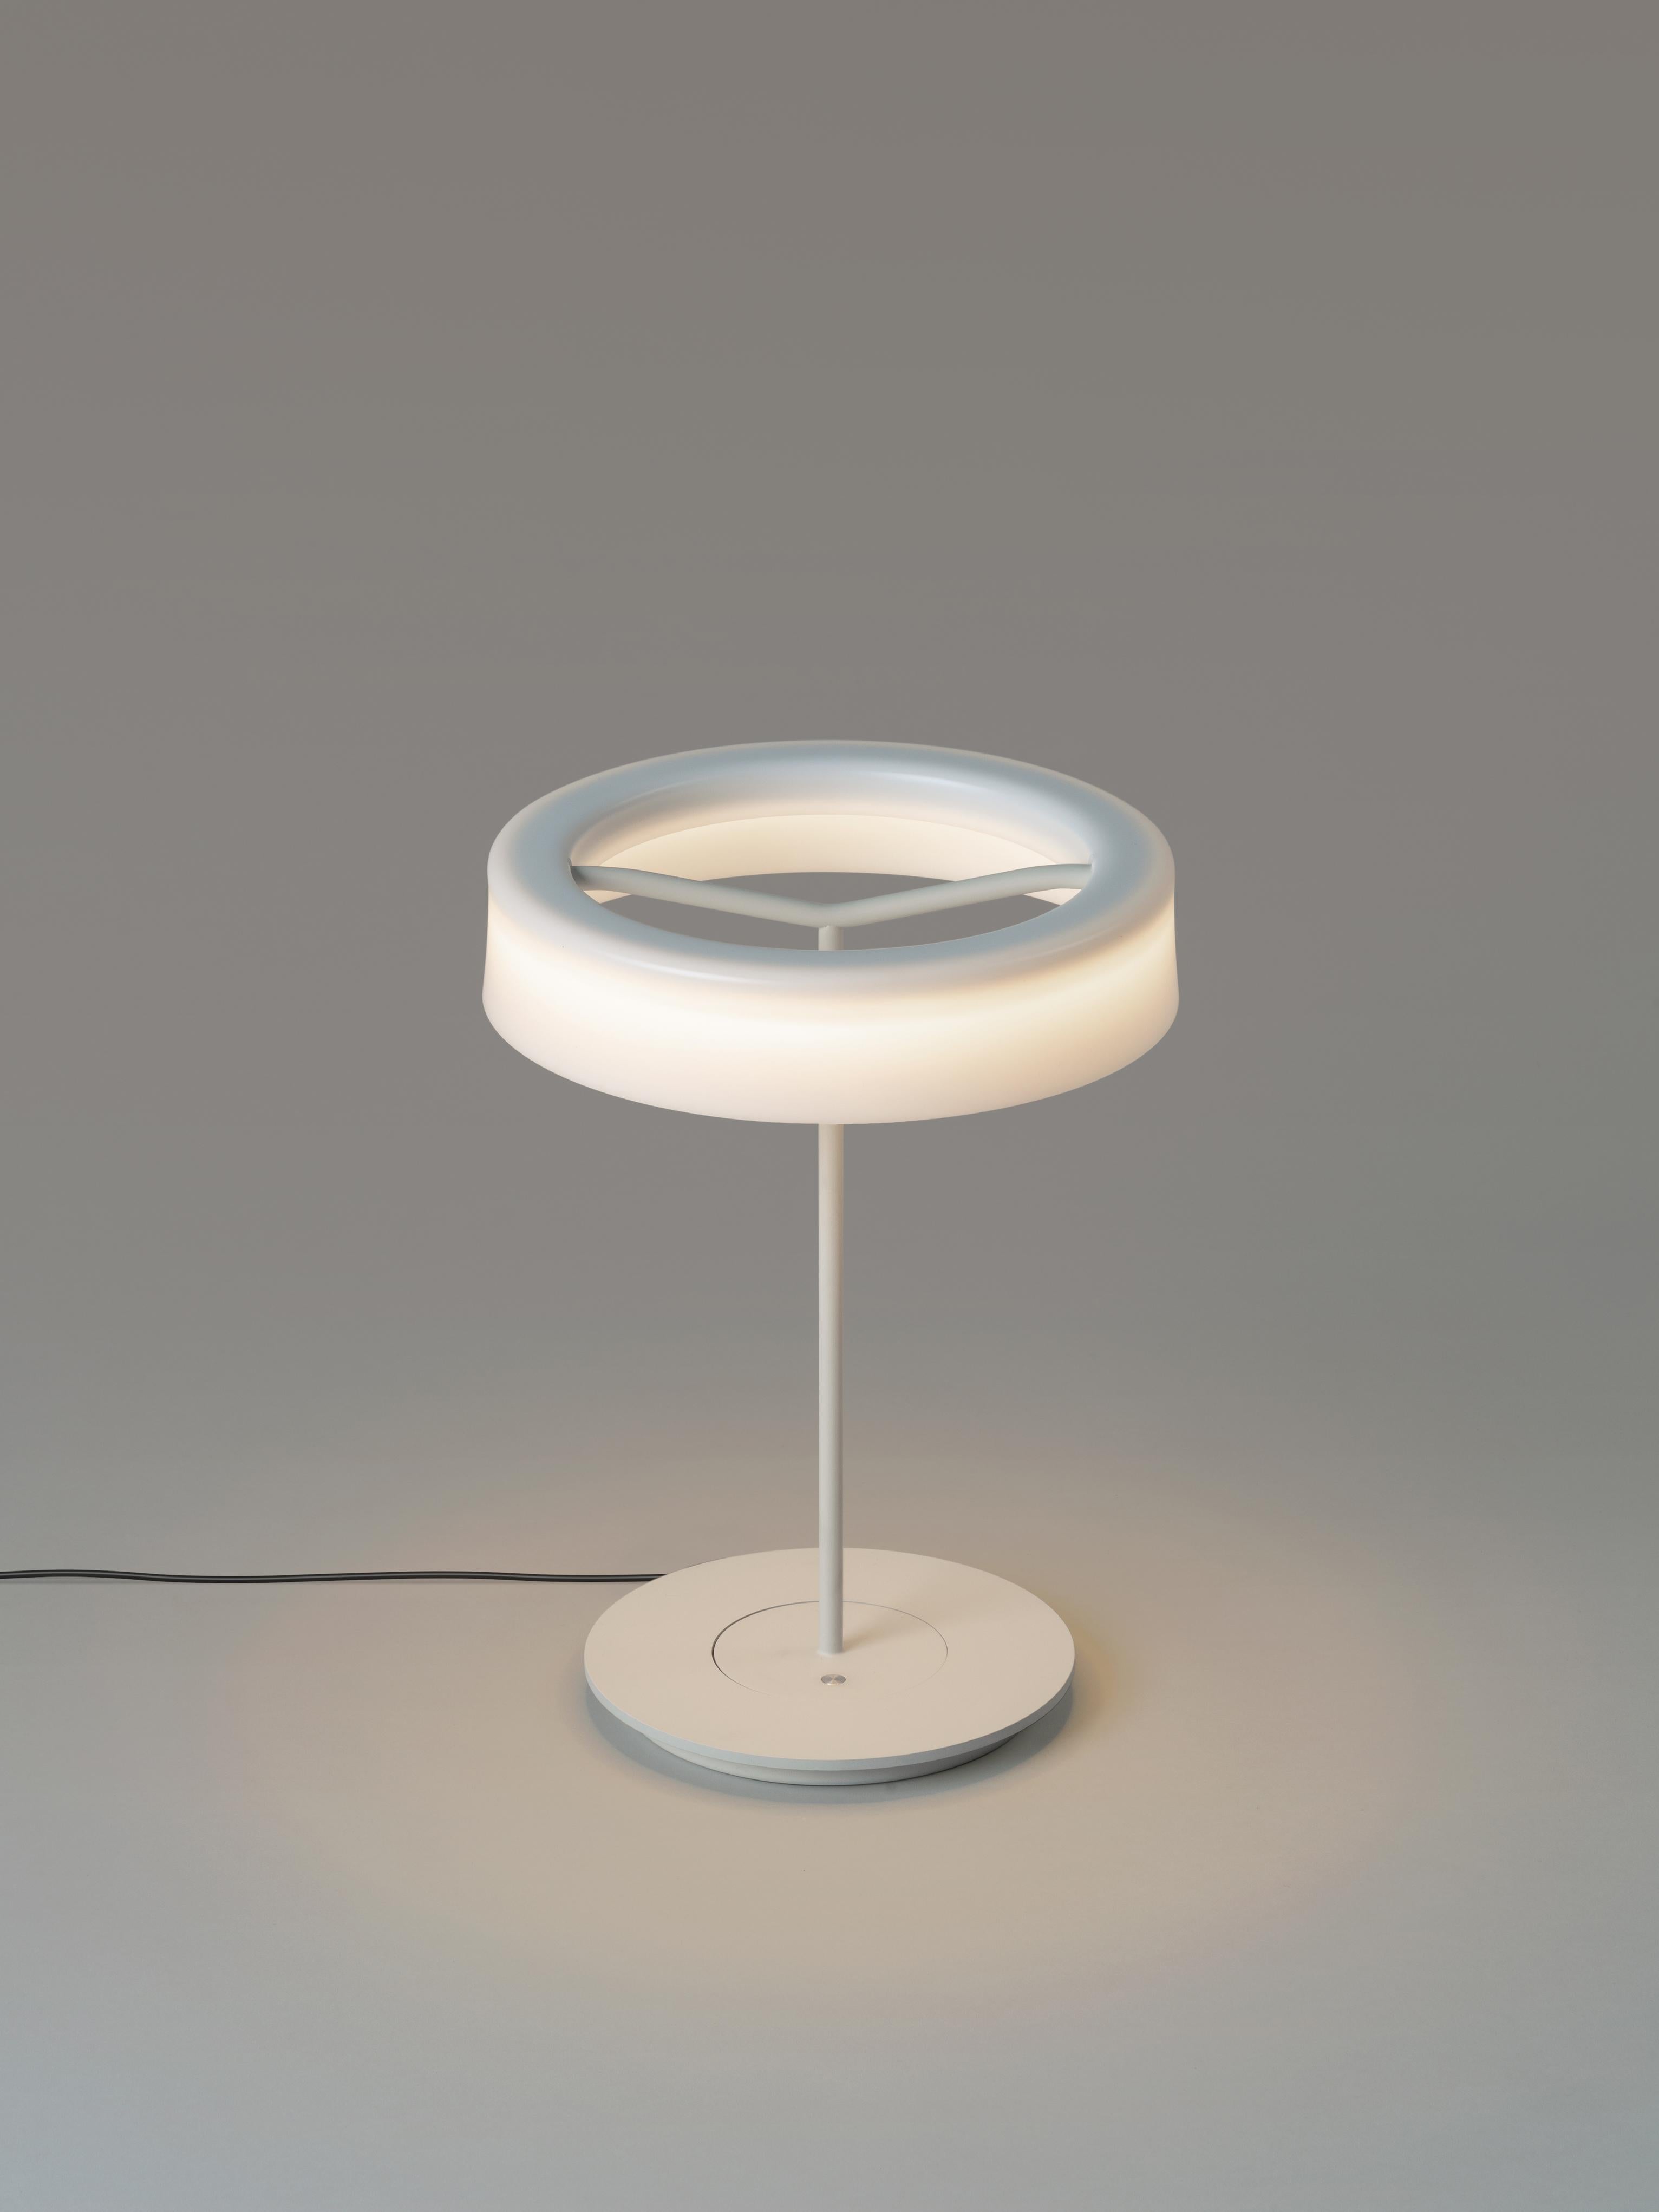 Small white sin table lamp with shade I by Antoni Arola
Dimensions: D 27 x H 36 cm
Materials: Metal.
Lampshade: White opal methacrylate.
Available in white or graphite, with or without shade.

A lamp that combines simplicity and technology to